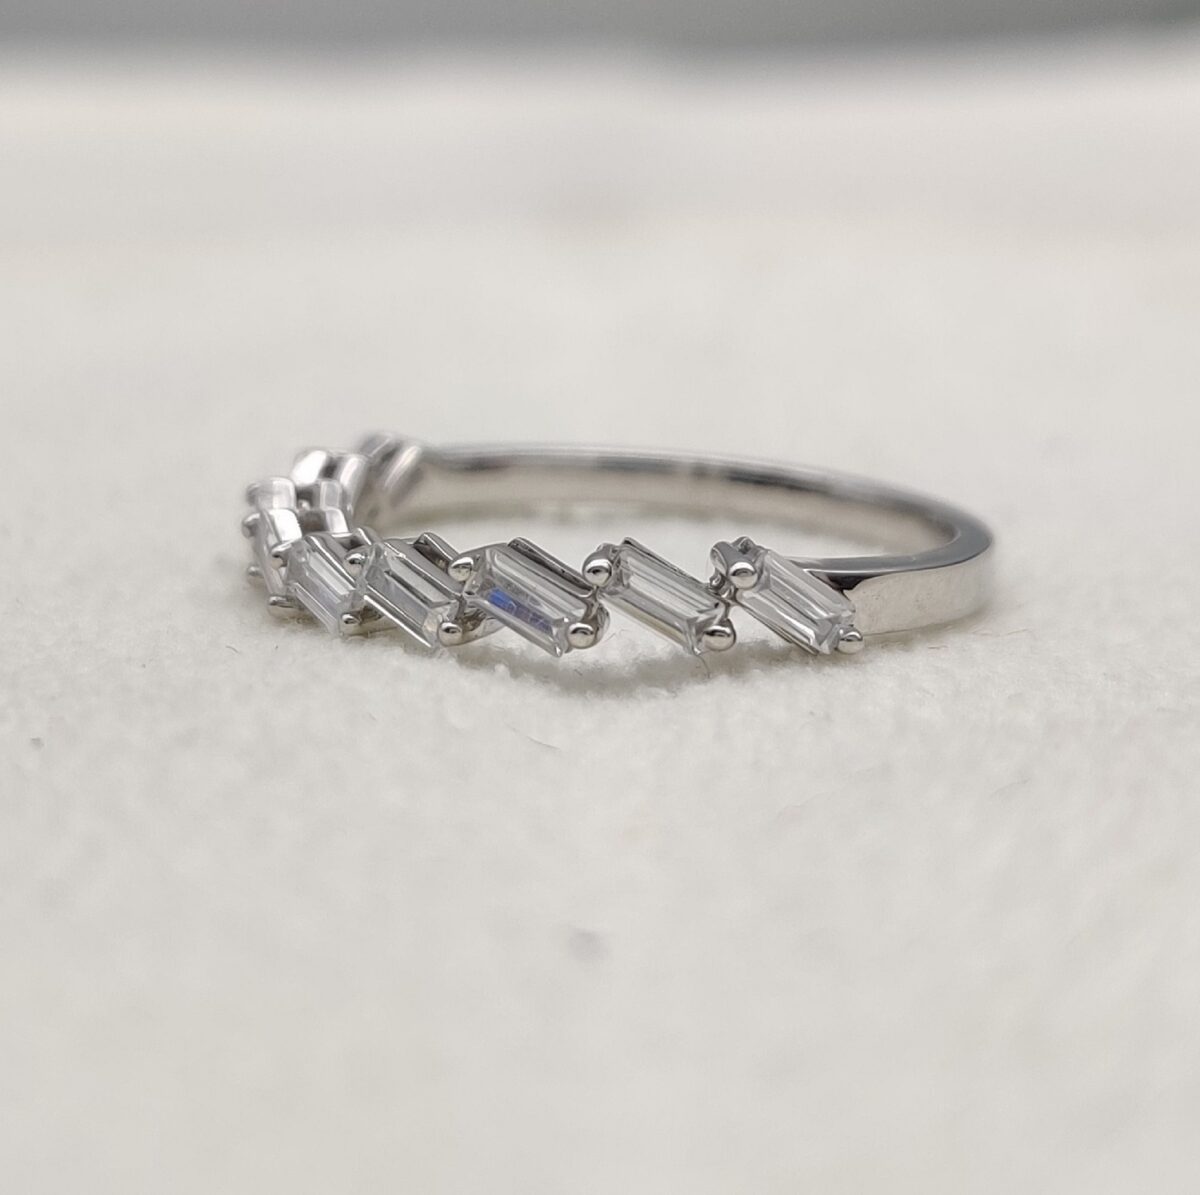 Baguette cut lab grown diamond wedding band crafted in 14k white gold.